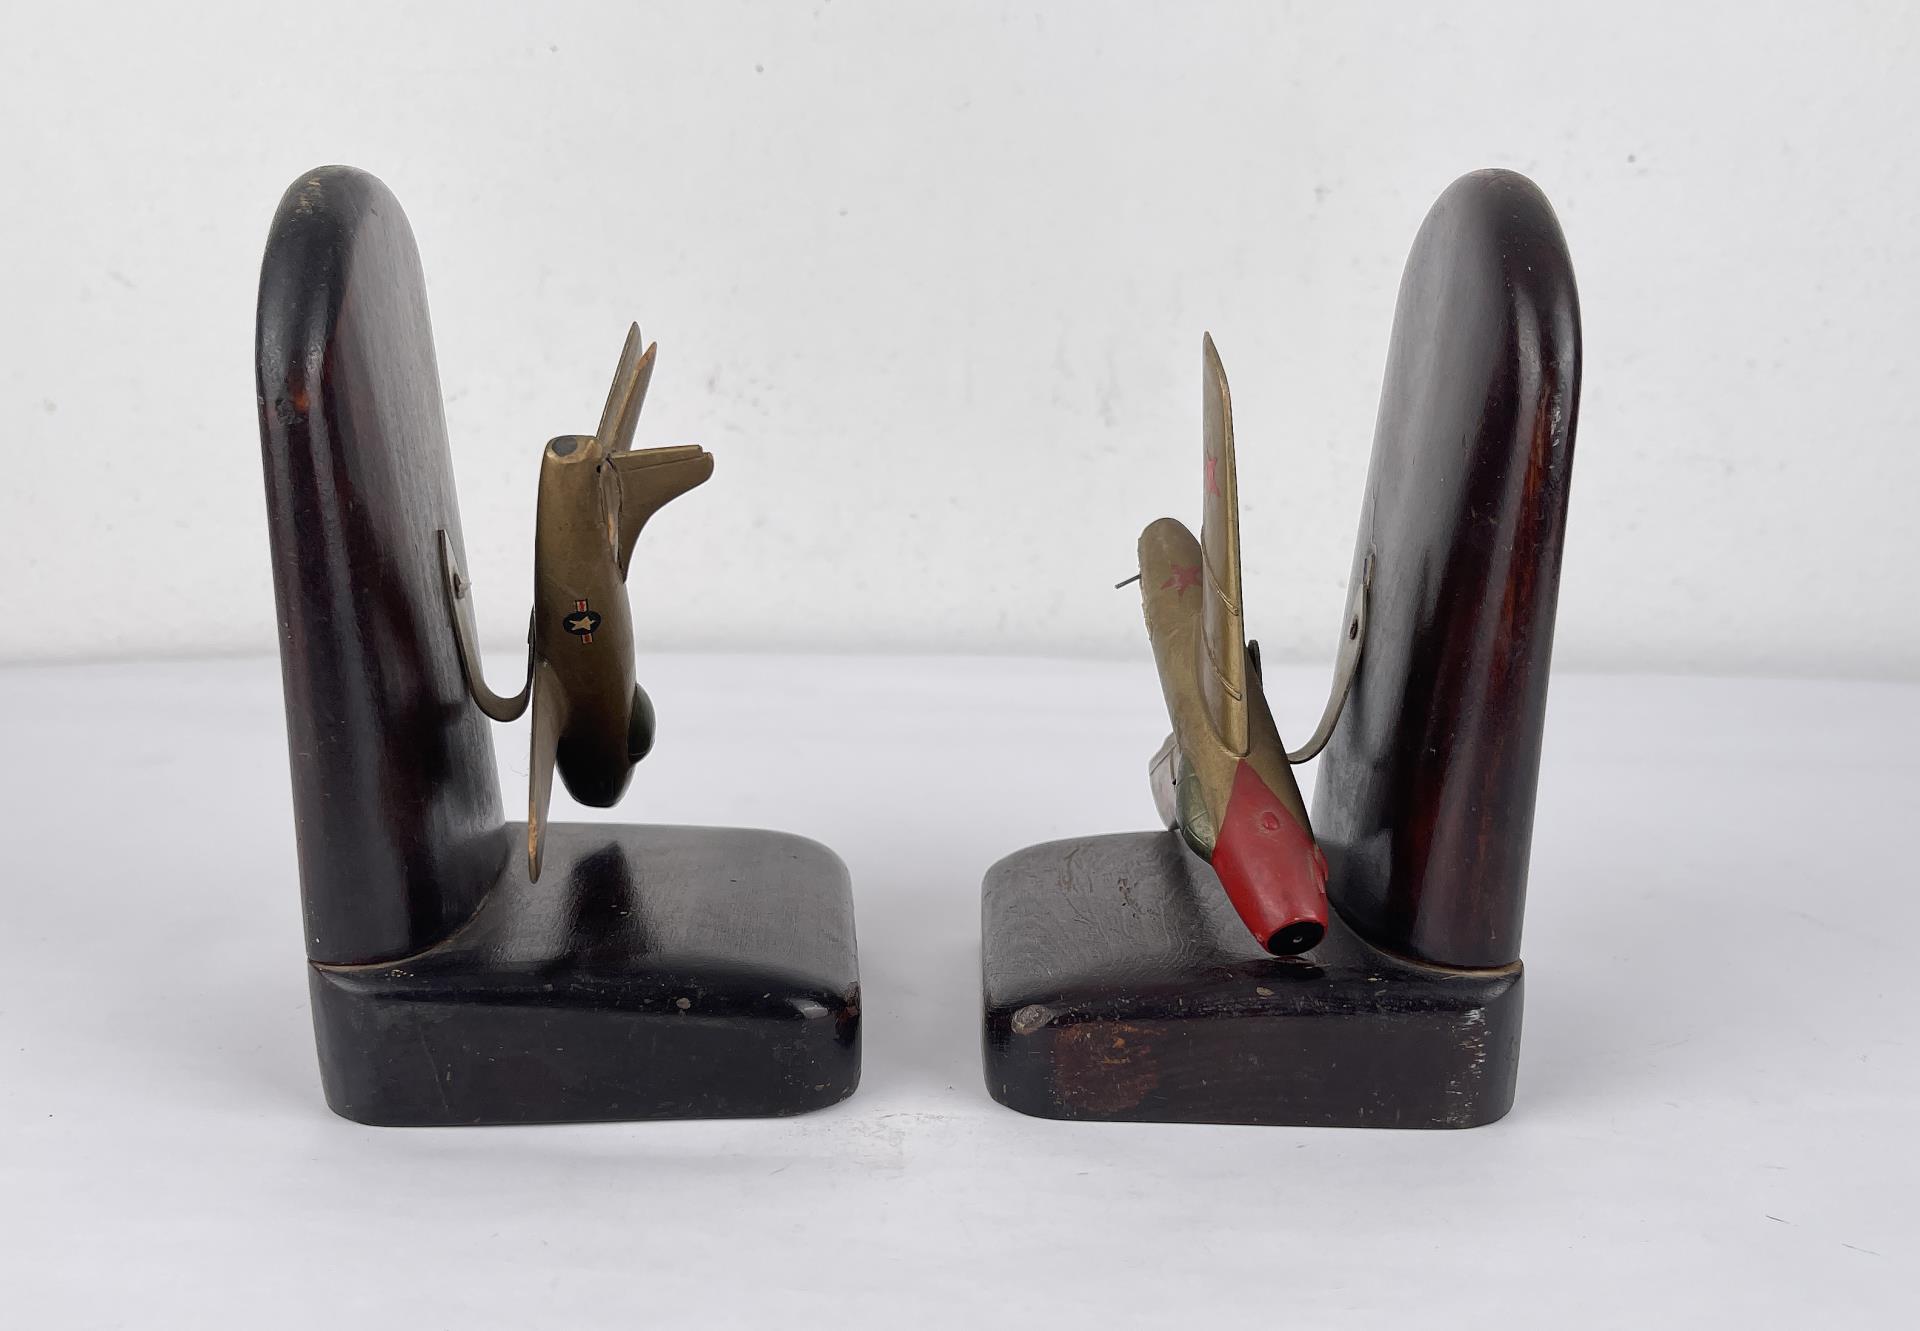 Trench Art Homefront WW2 Bookends